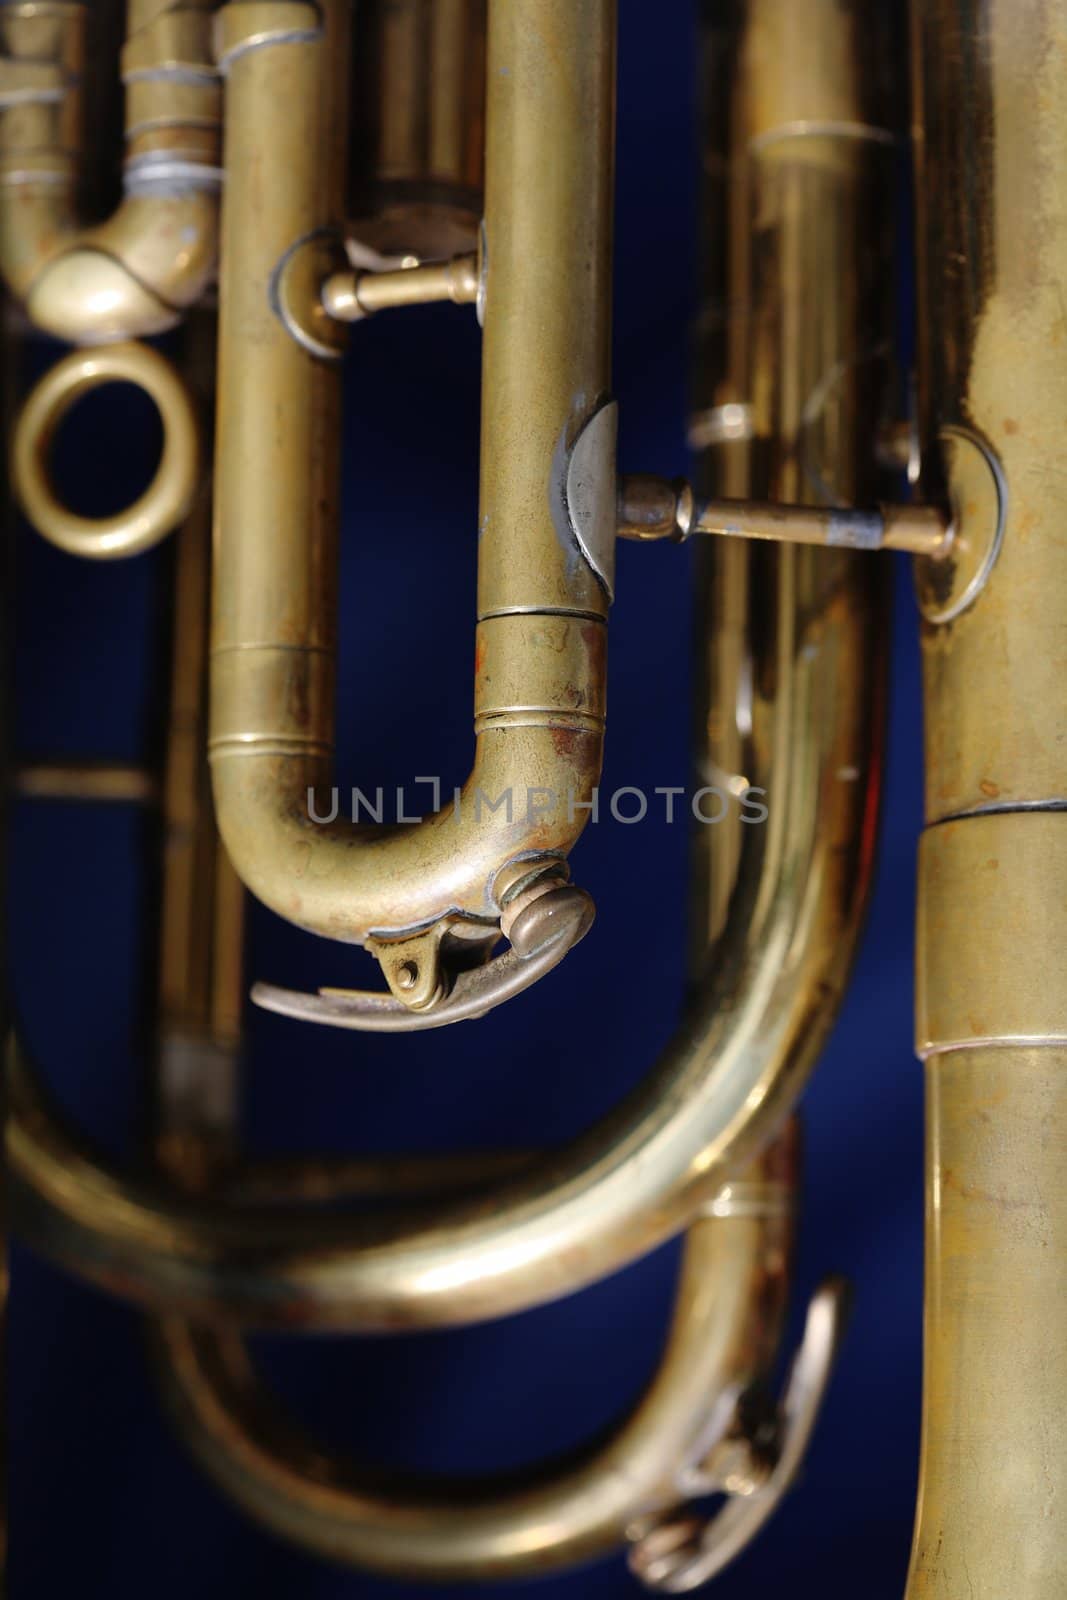 Old Baritone by Stocksnapper